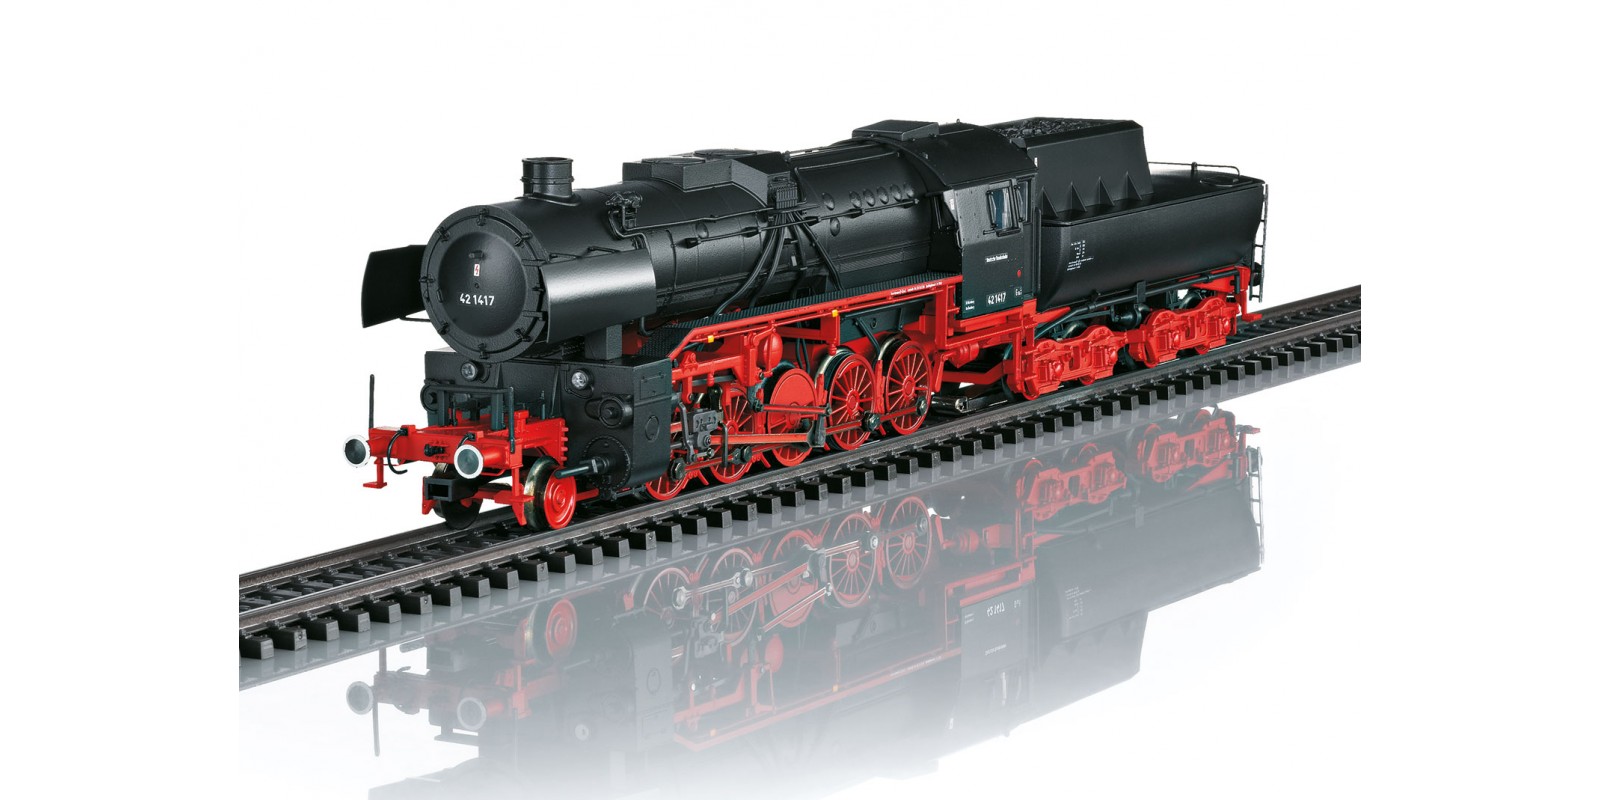 39042 Class 42 Heavy Steam Freight Locomotive with a Tub-Style Tender